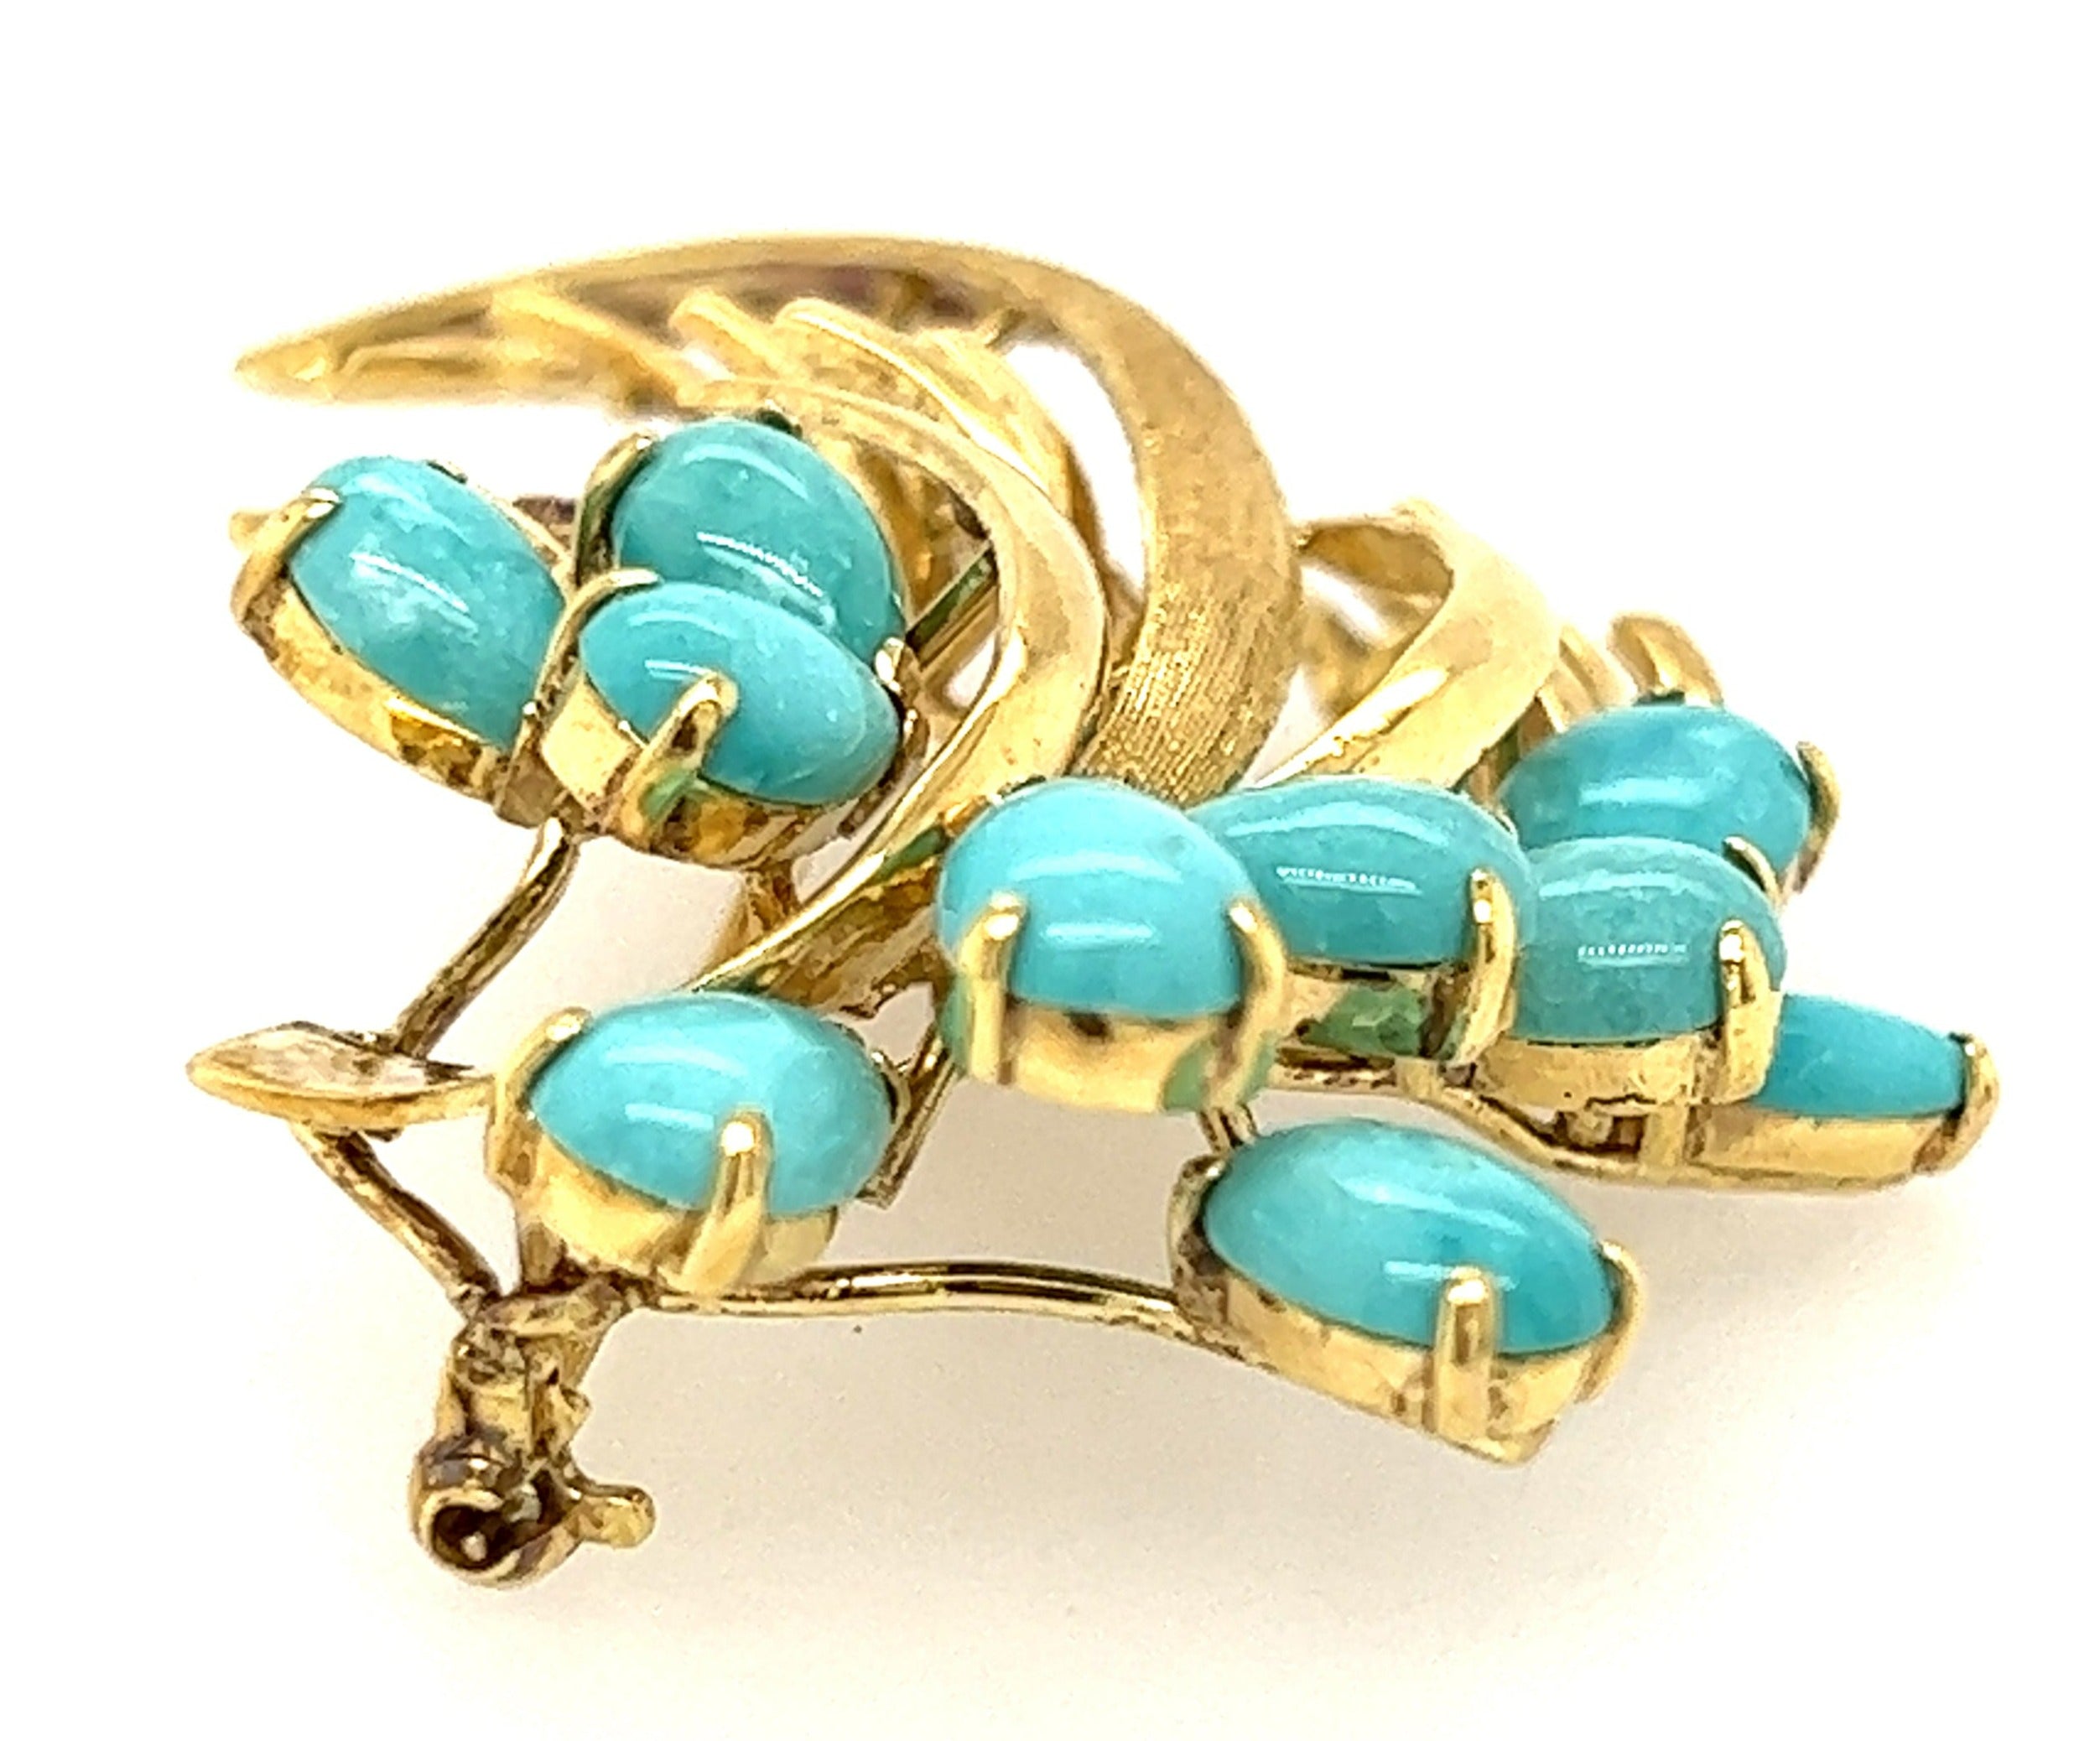 14ct Yellow Gold & Turquoise Spray Style Brooch